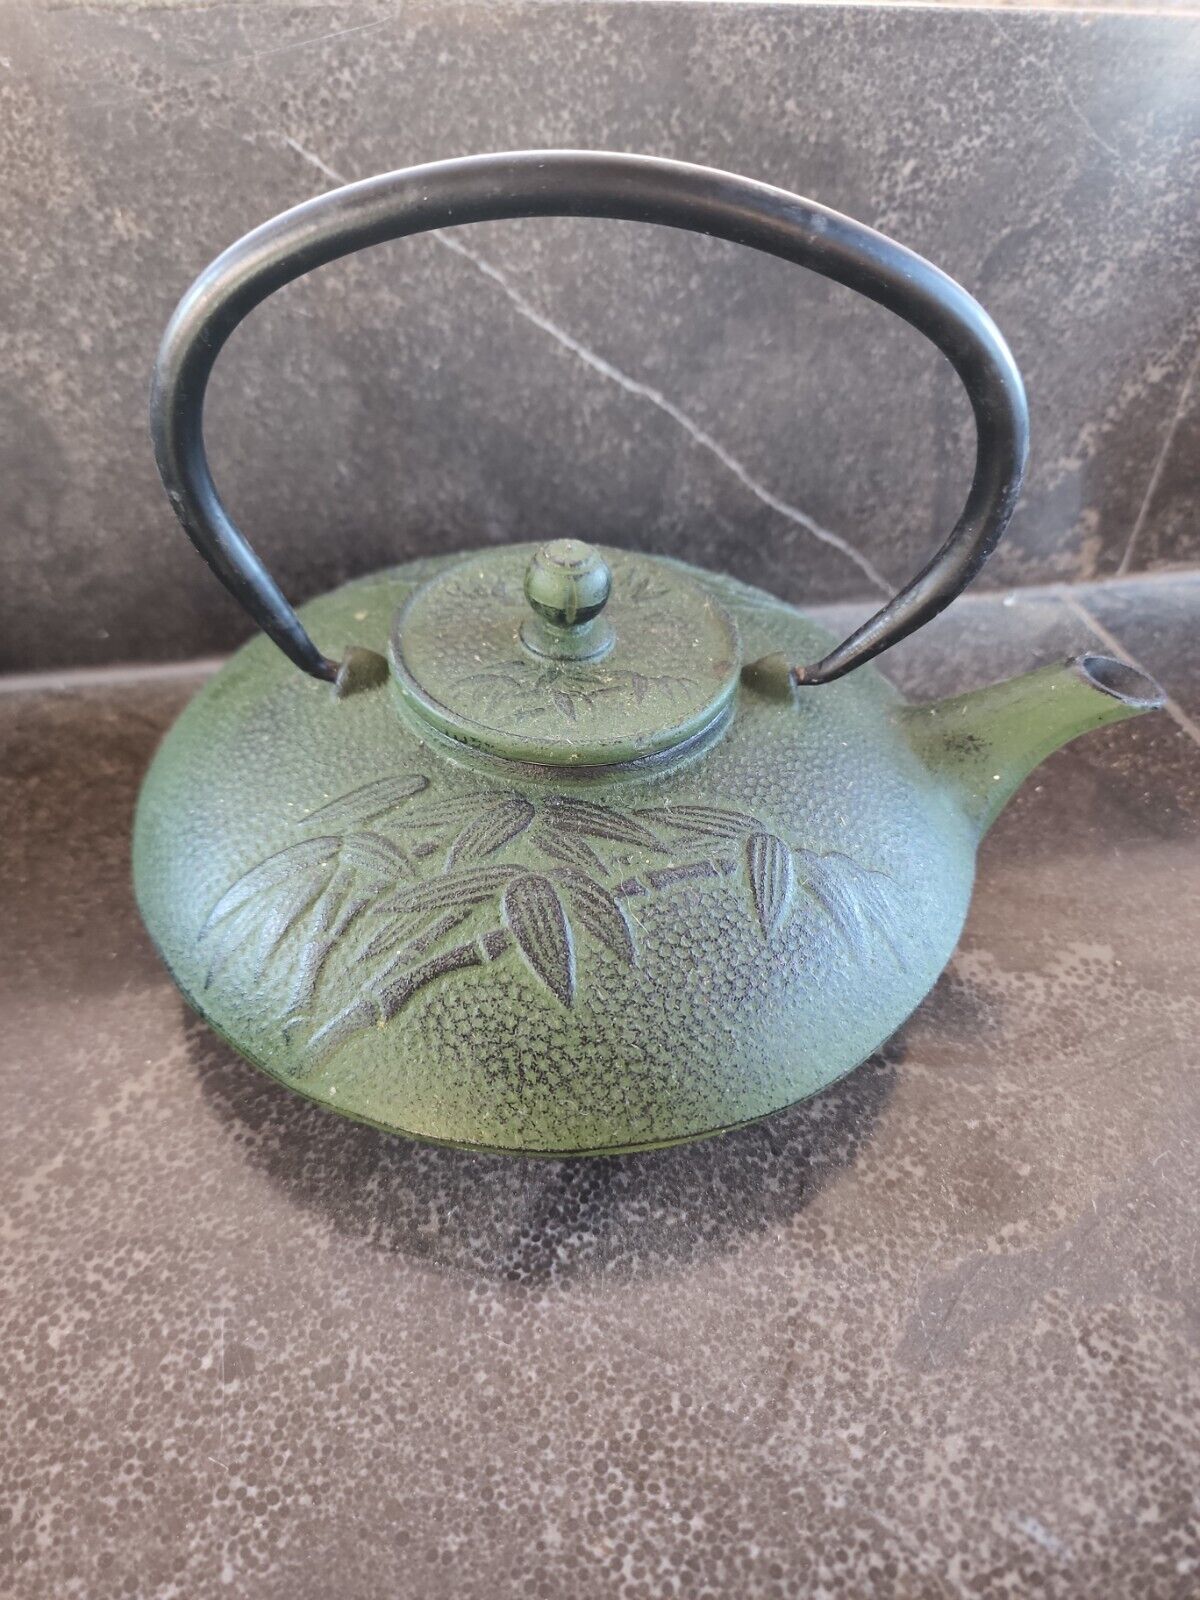 Cast iron teapot with infuser